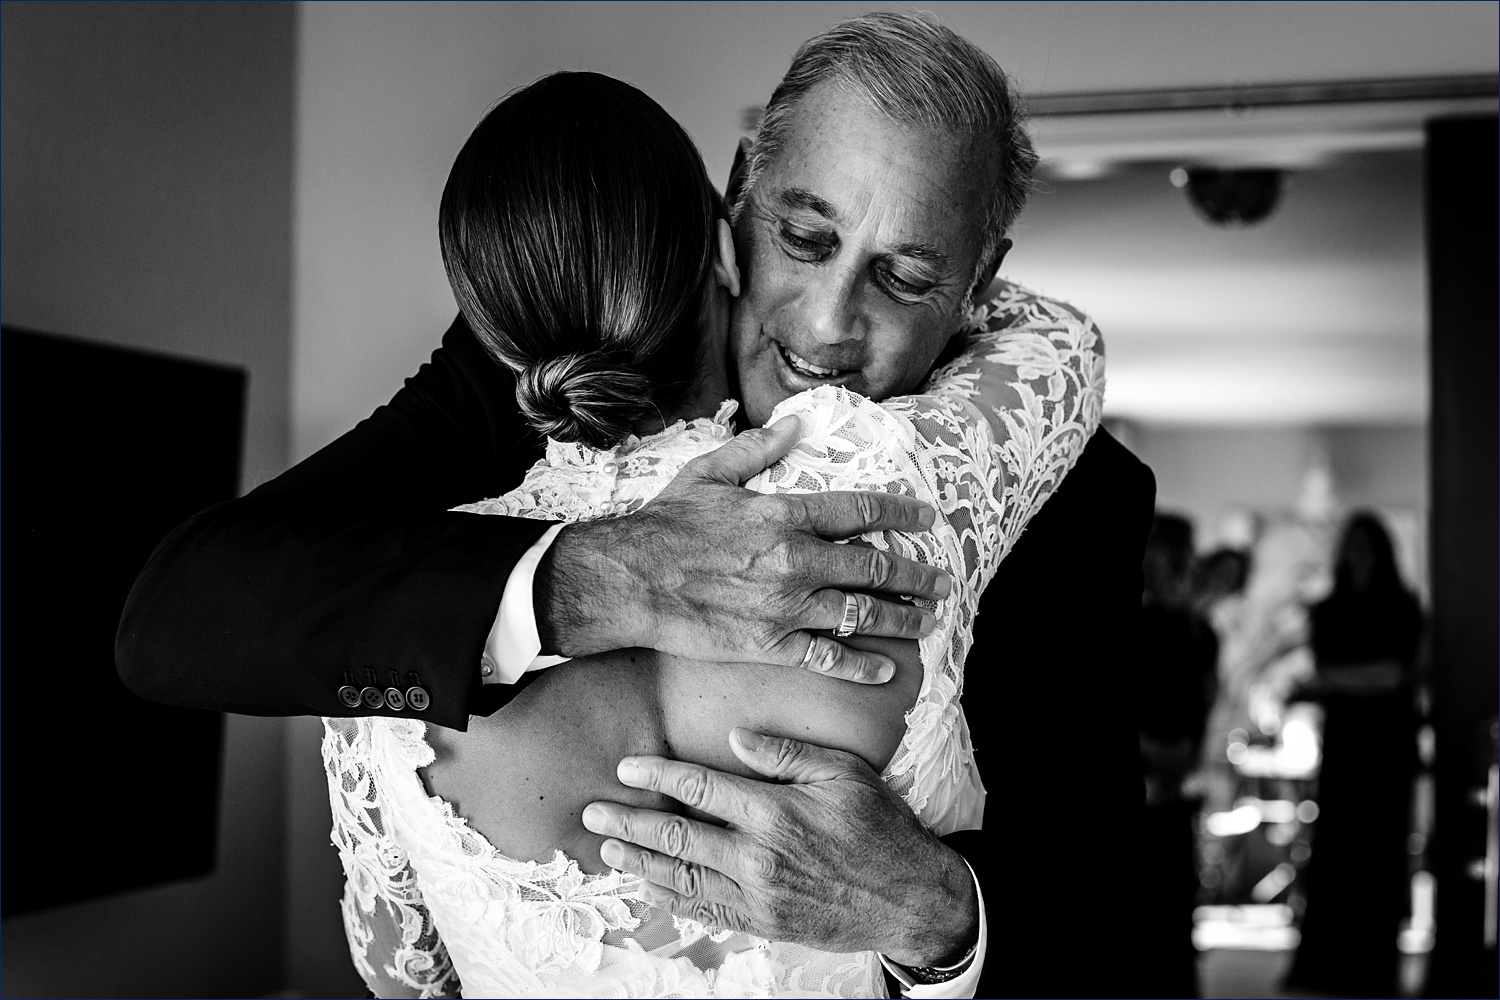 The bride hugs her father tight when he sees her for the first time on her wedding day